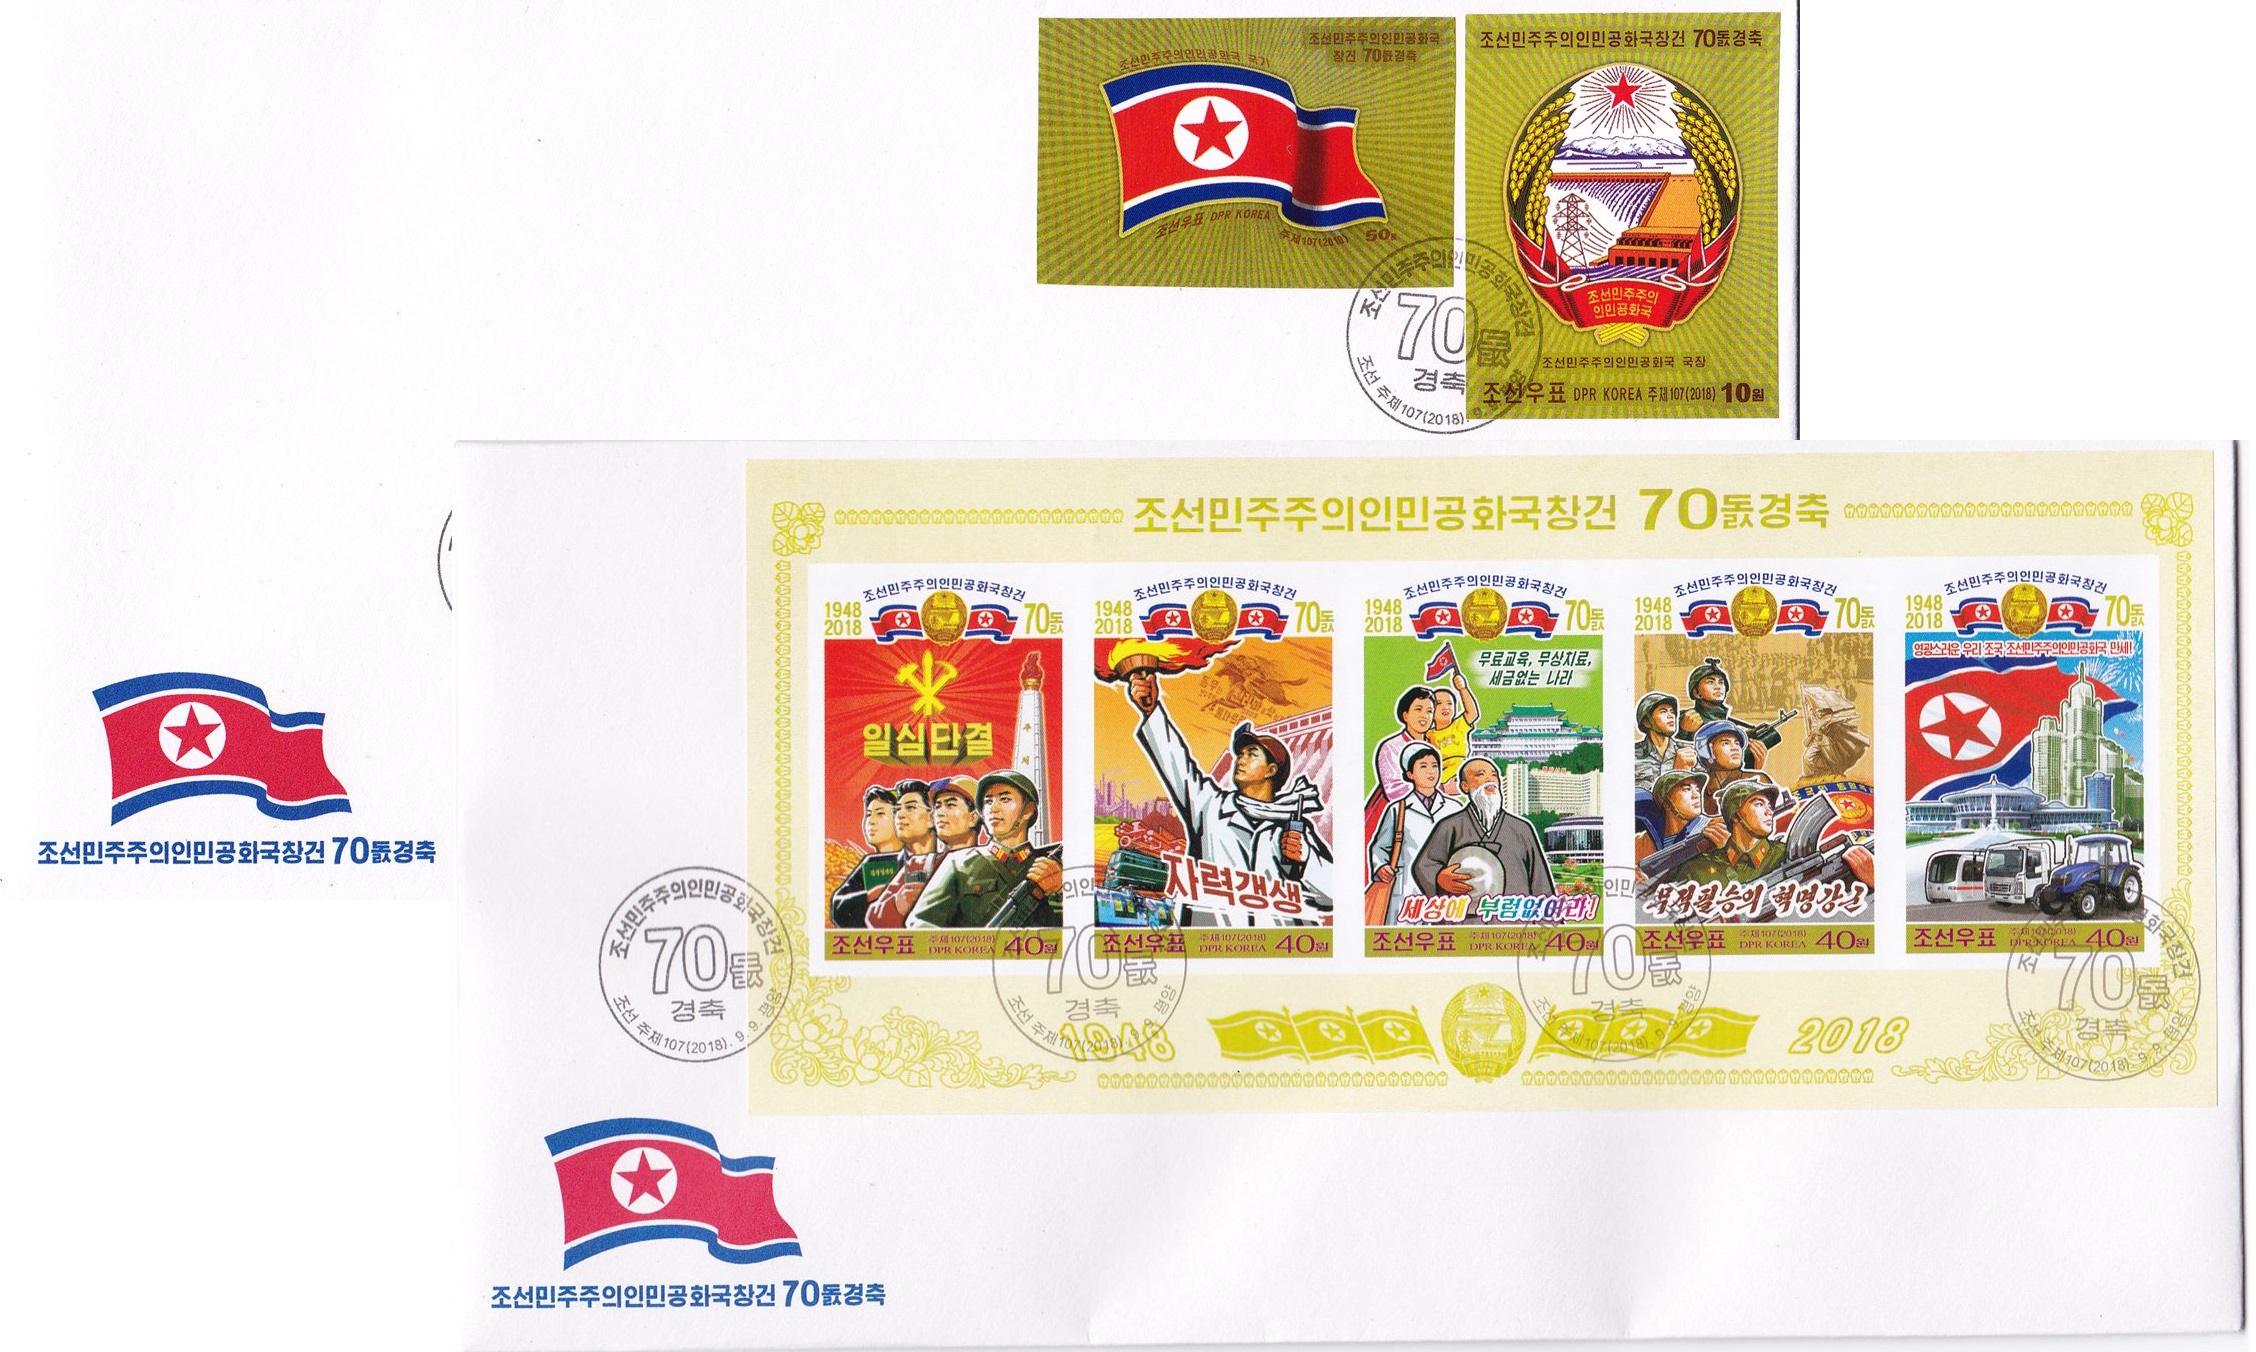 L9718, Korea "70th Anniv. Founding of Korea", 2 Pcs Stamps FDC, 2018 Imperforate